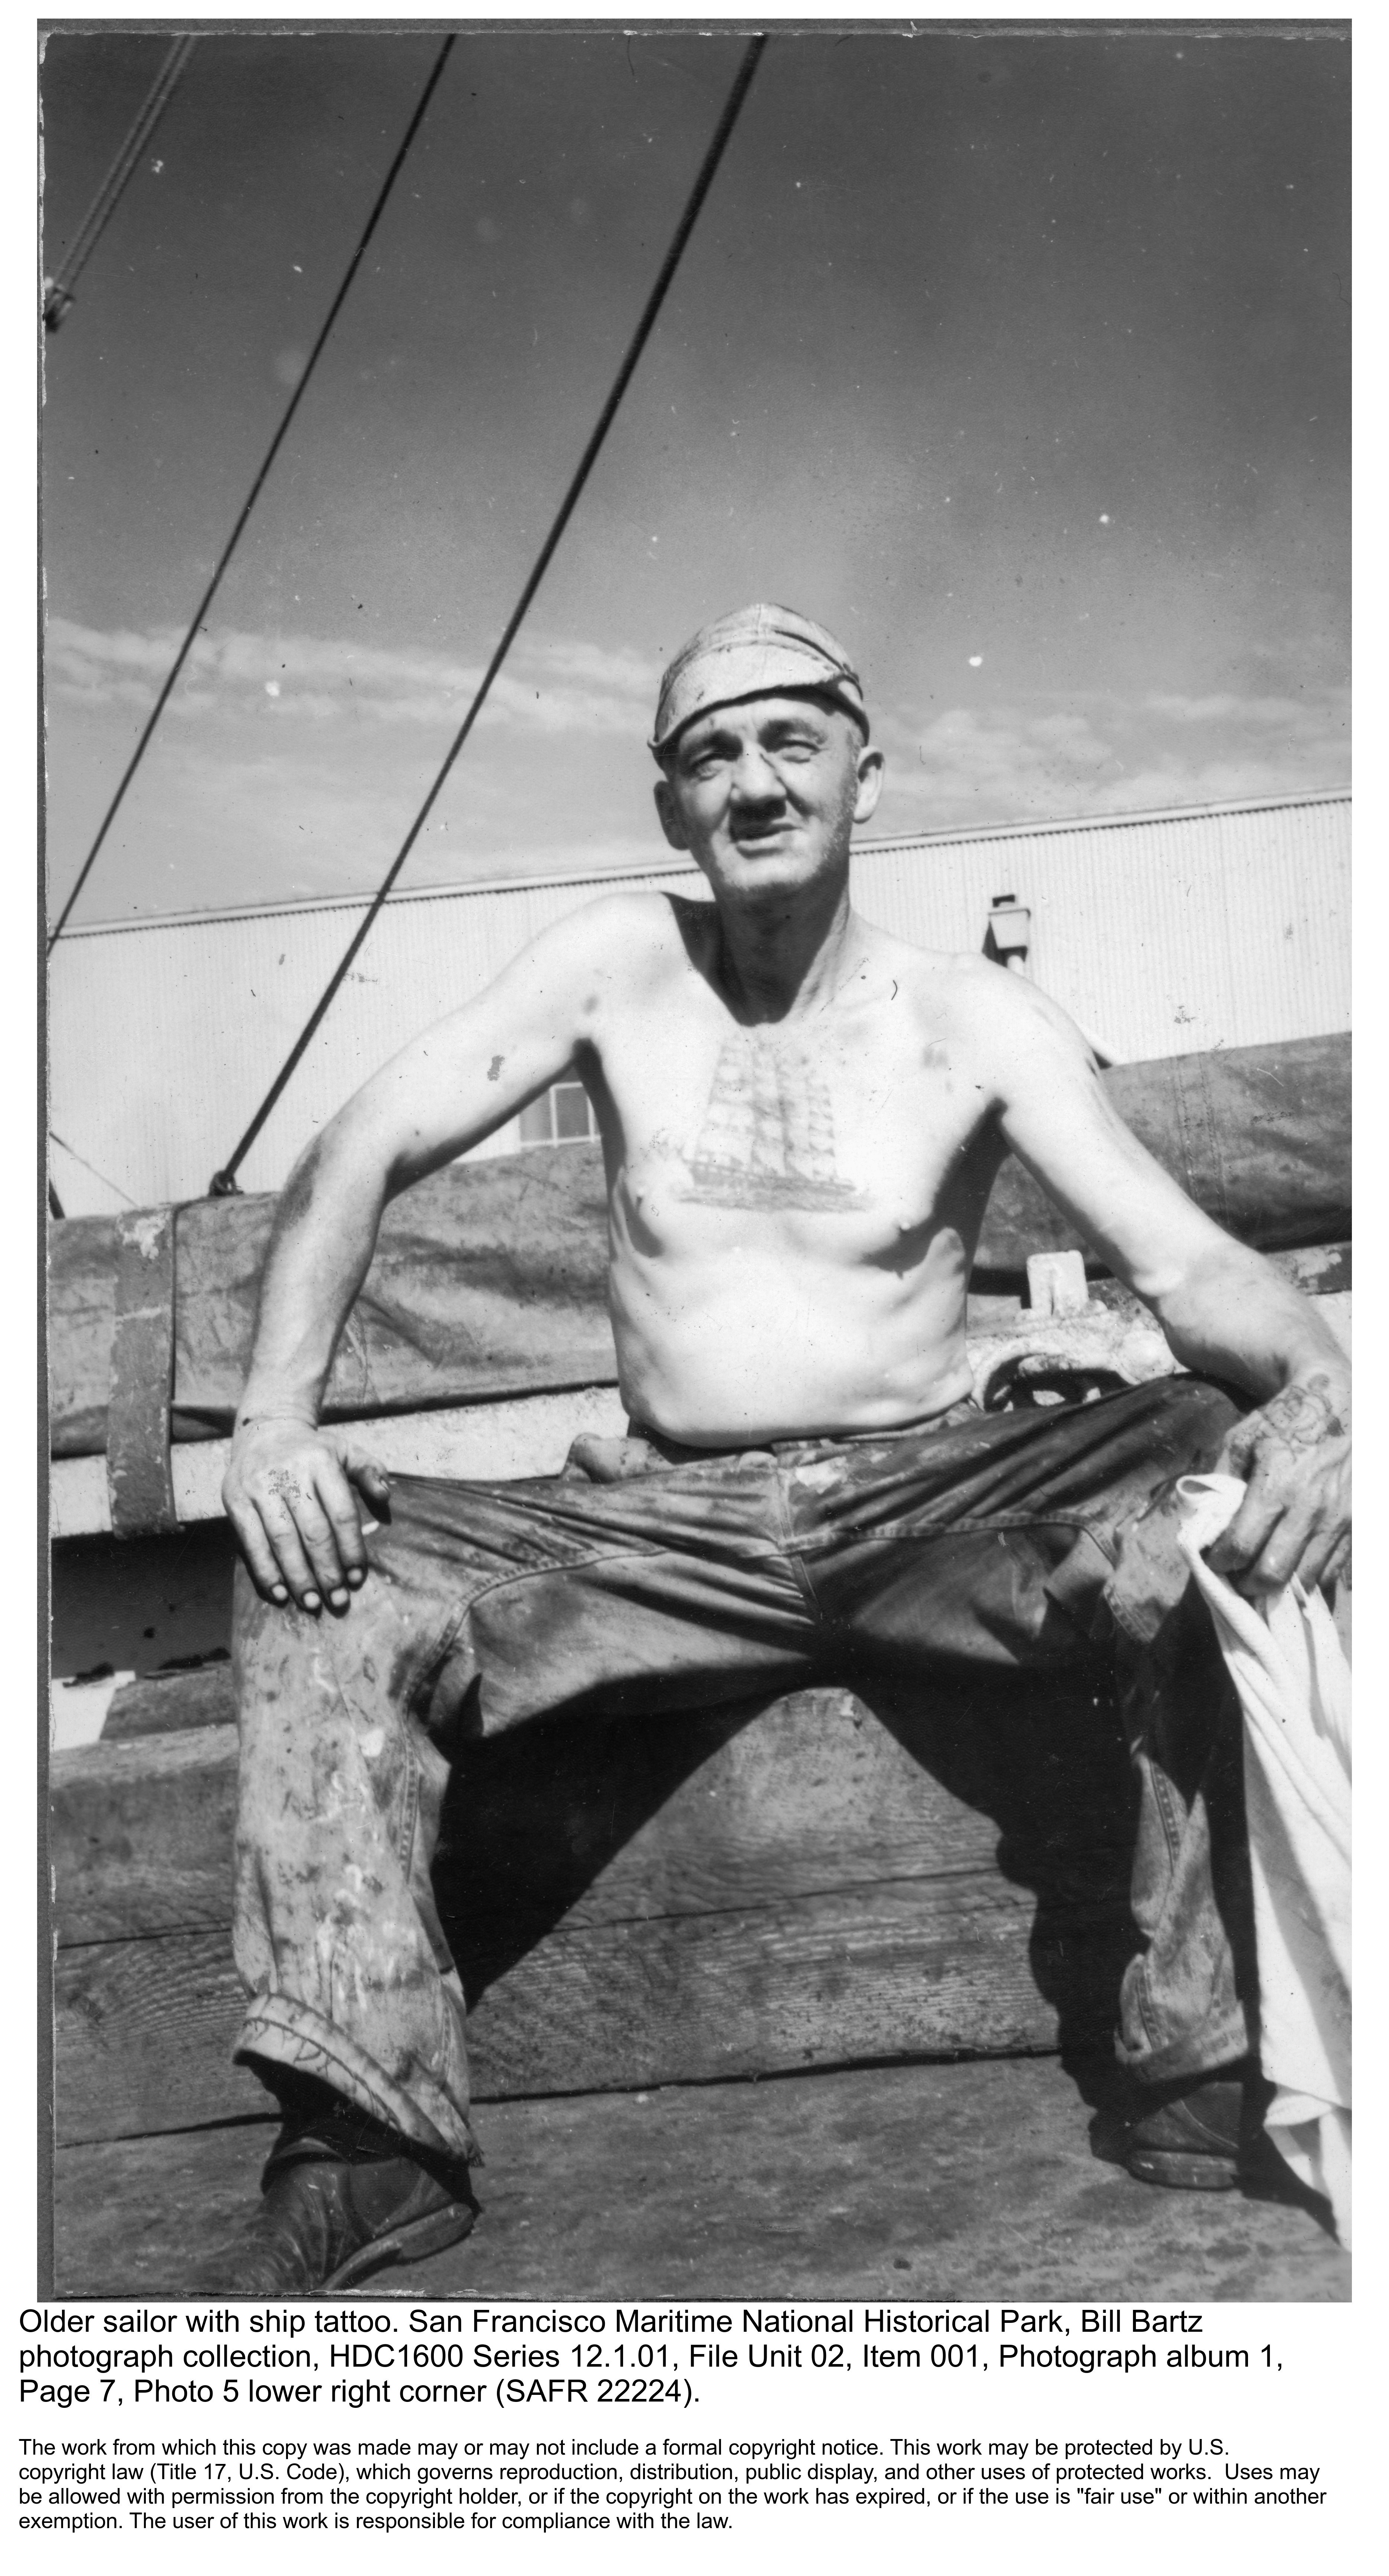 Old Sailor with Ship Tattoo